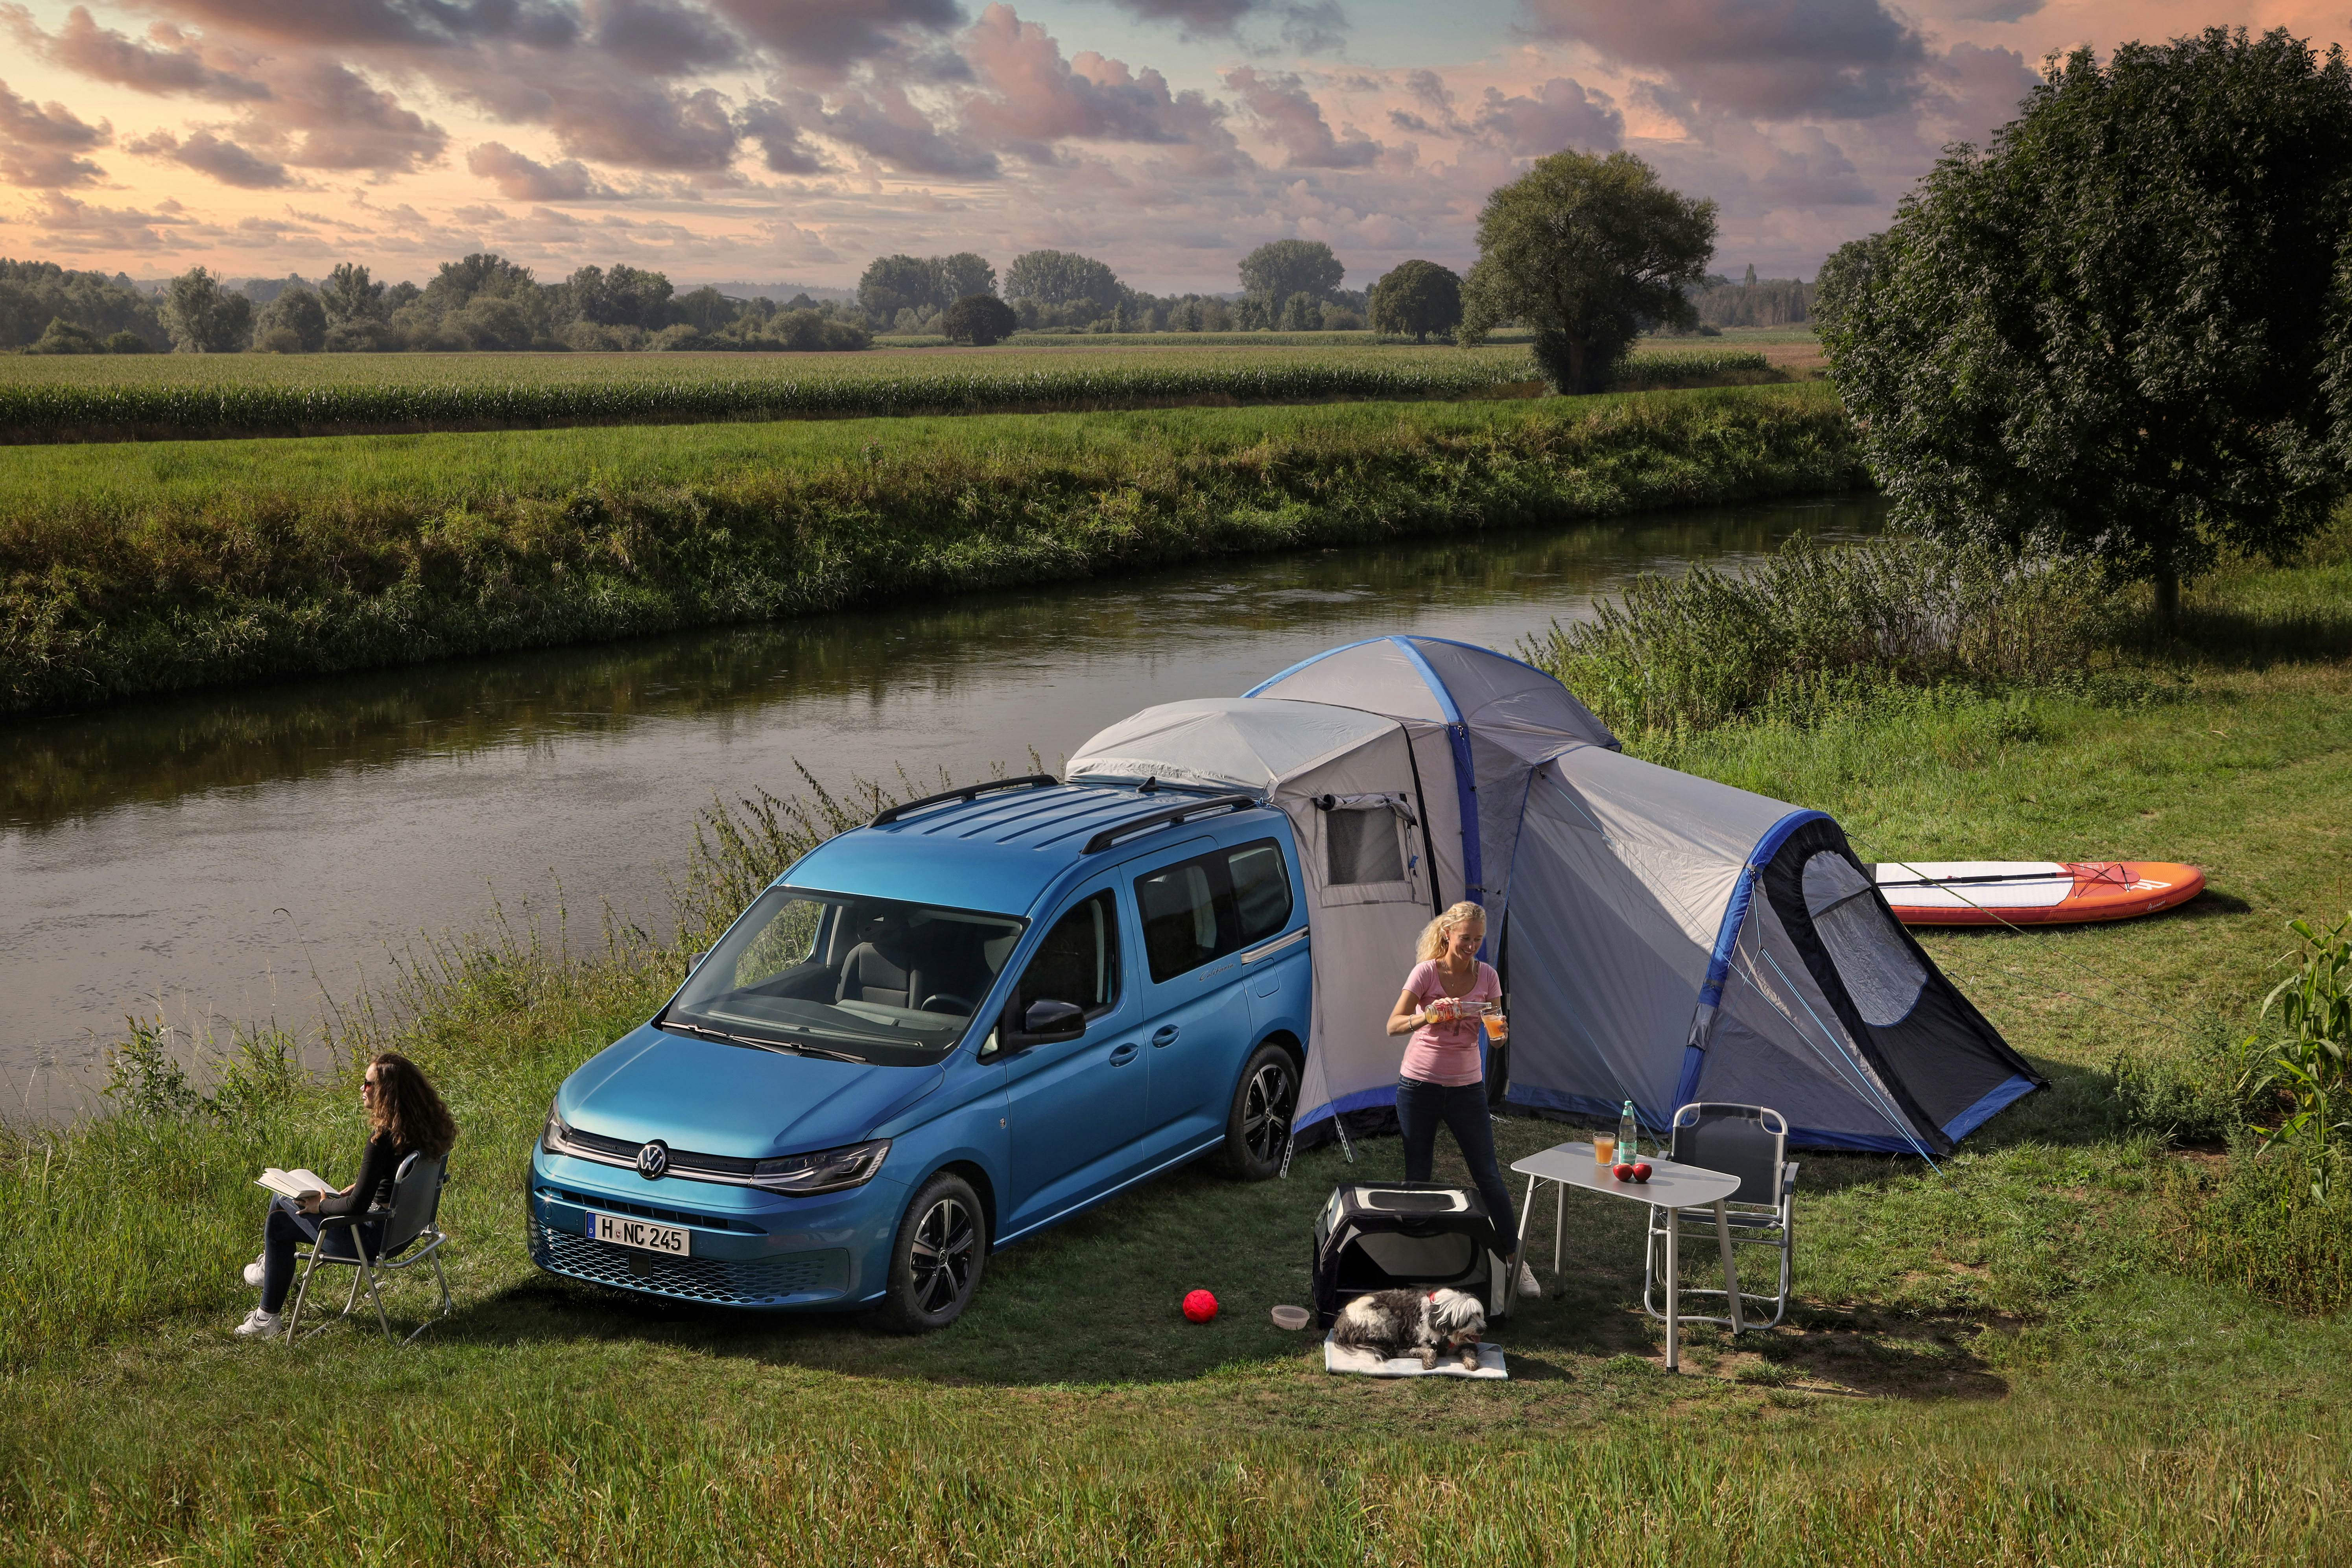 Turn your car into a camper with this portable unit - Lonely Planet